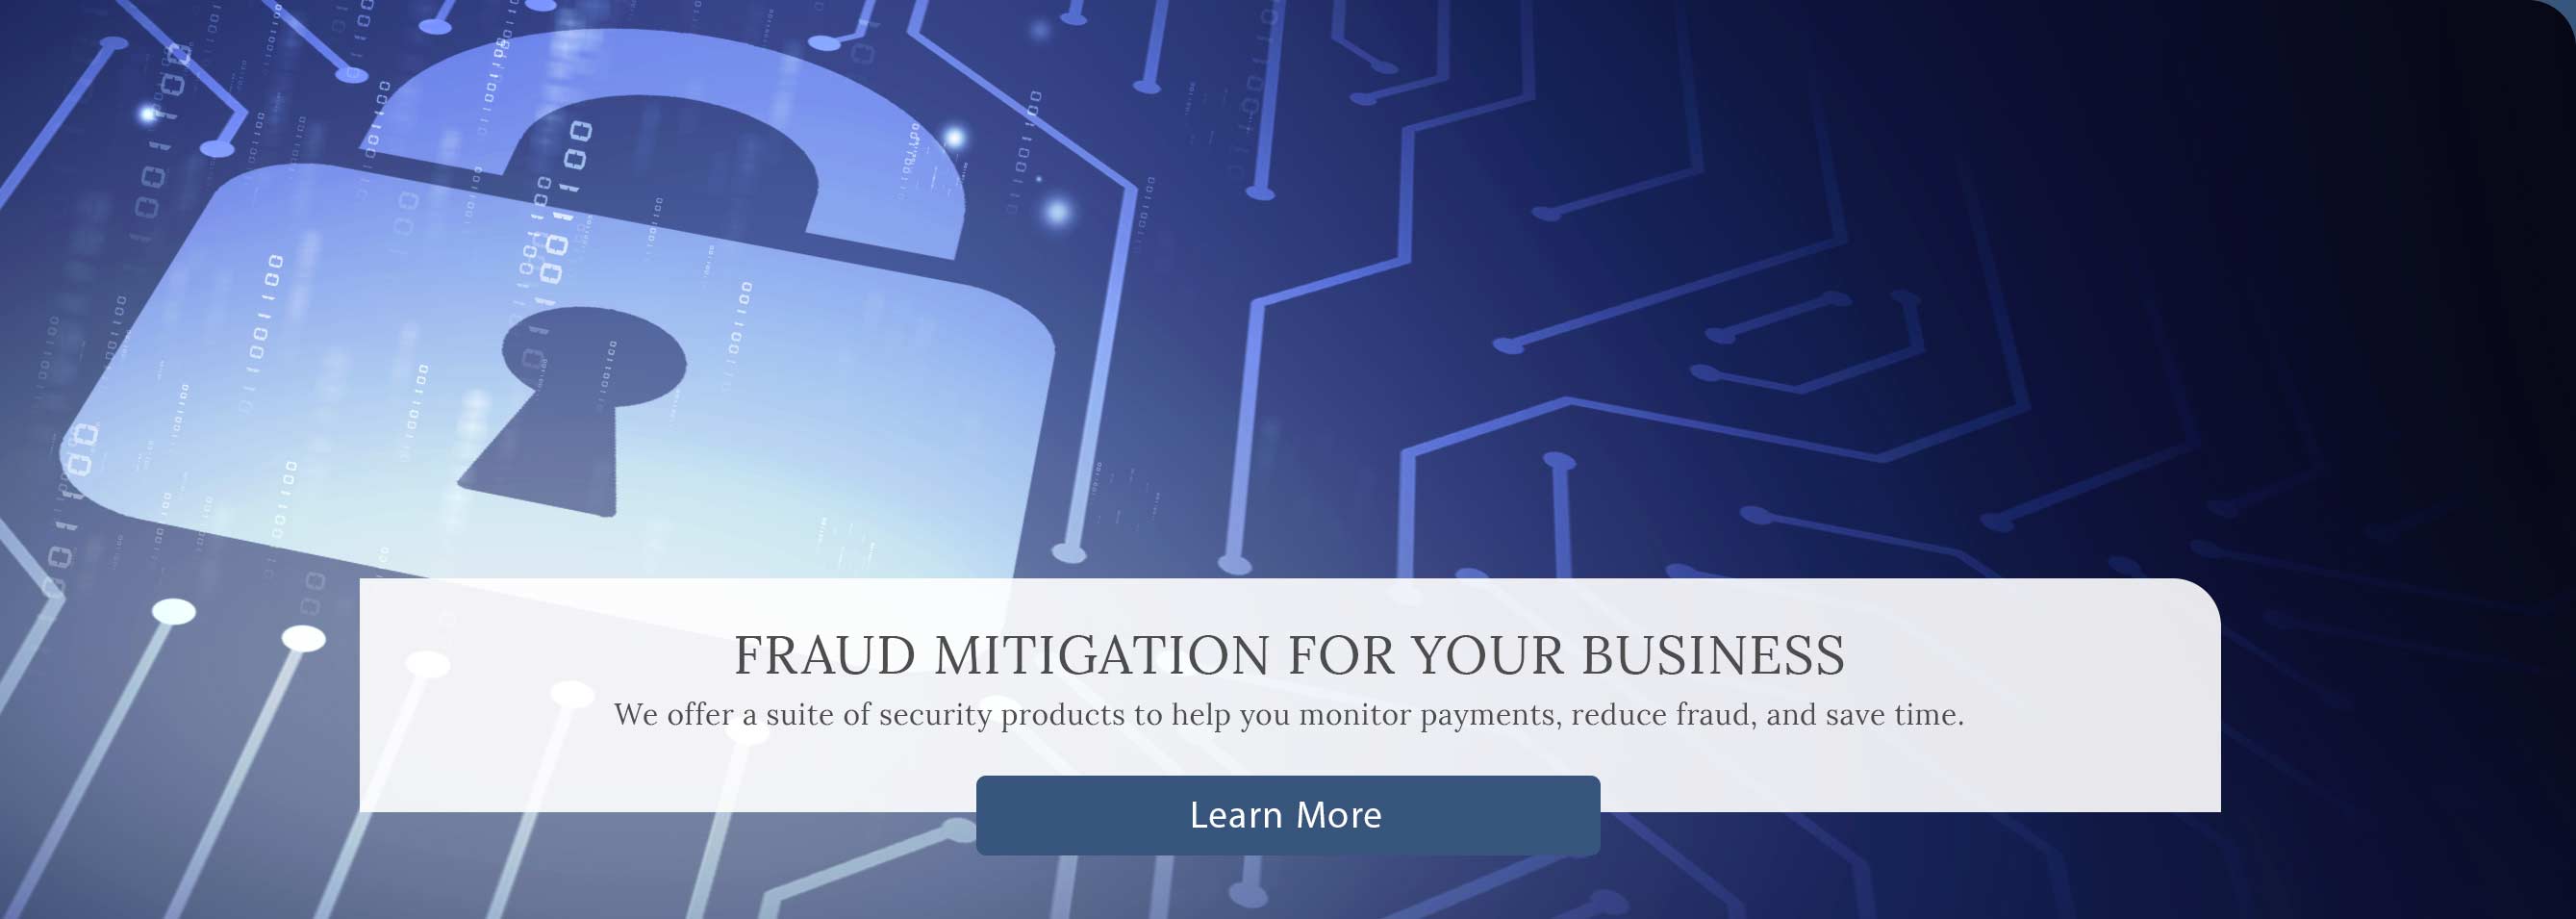 Fraud Mitigation Tools for Your Business